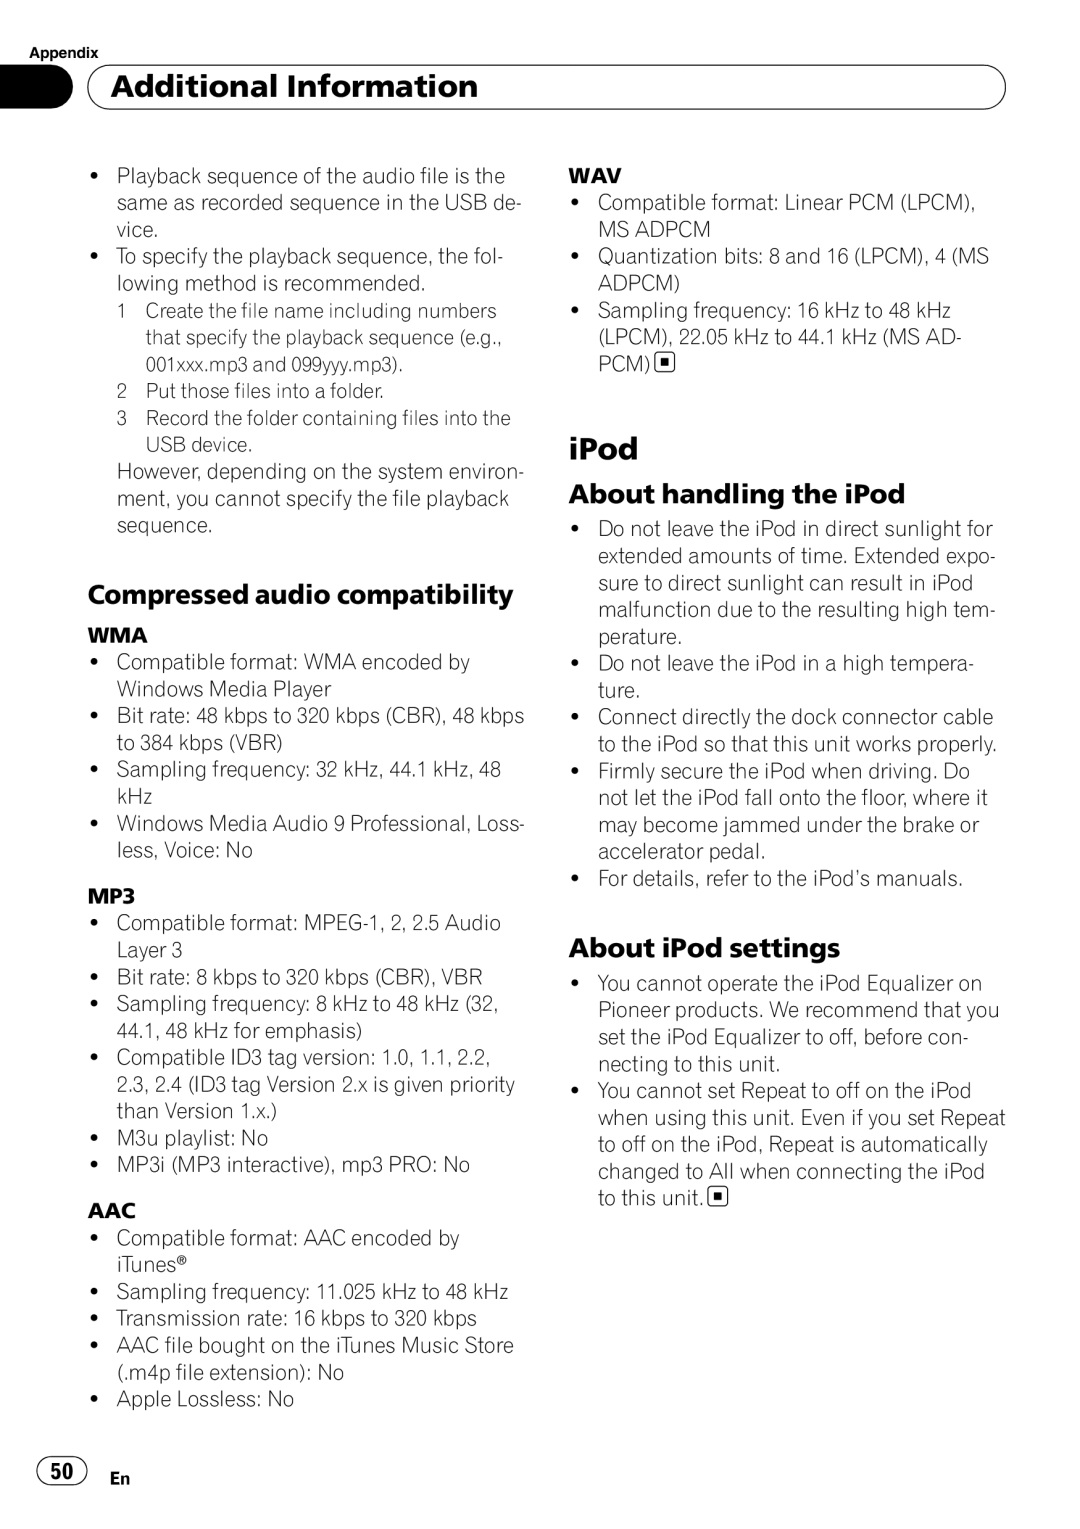 Pioneer DEH-P4050UB operation manual Compressed audio compatibility, About handling the iPod, About iPod settings 